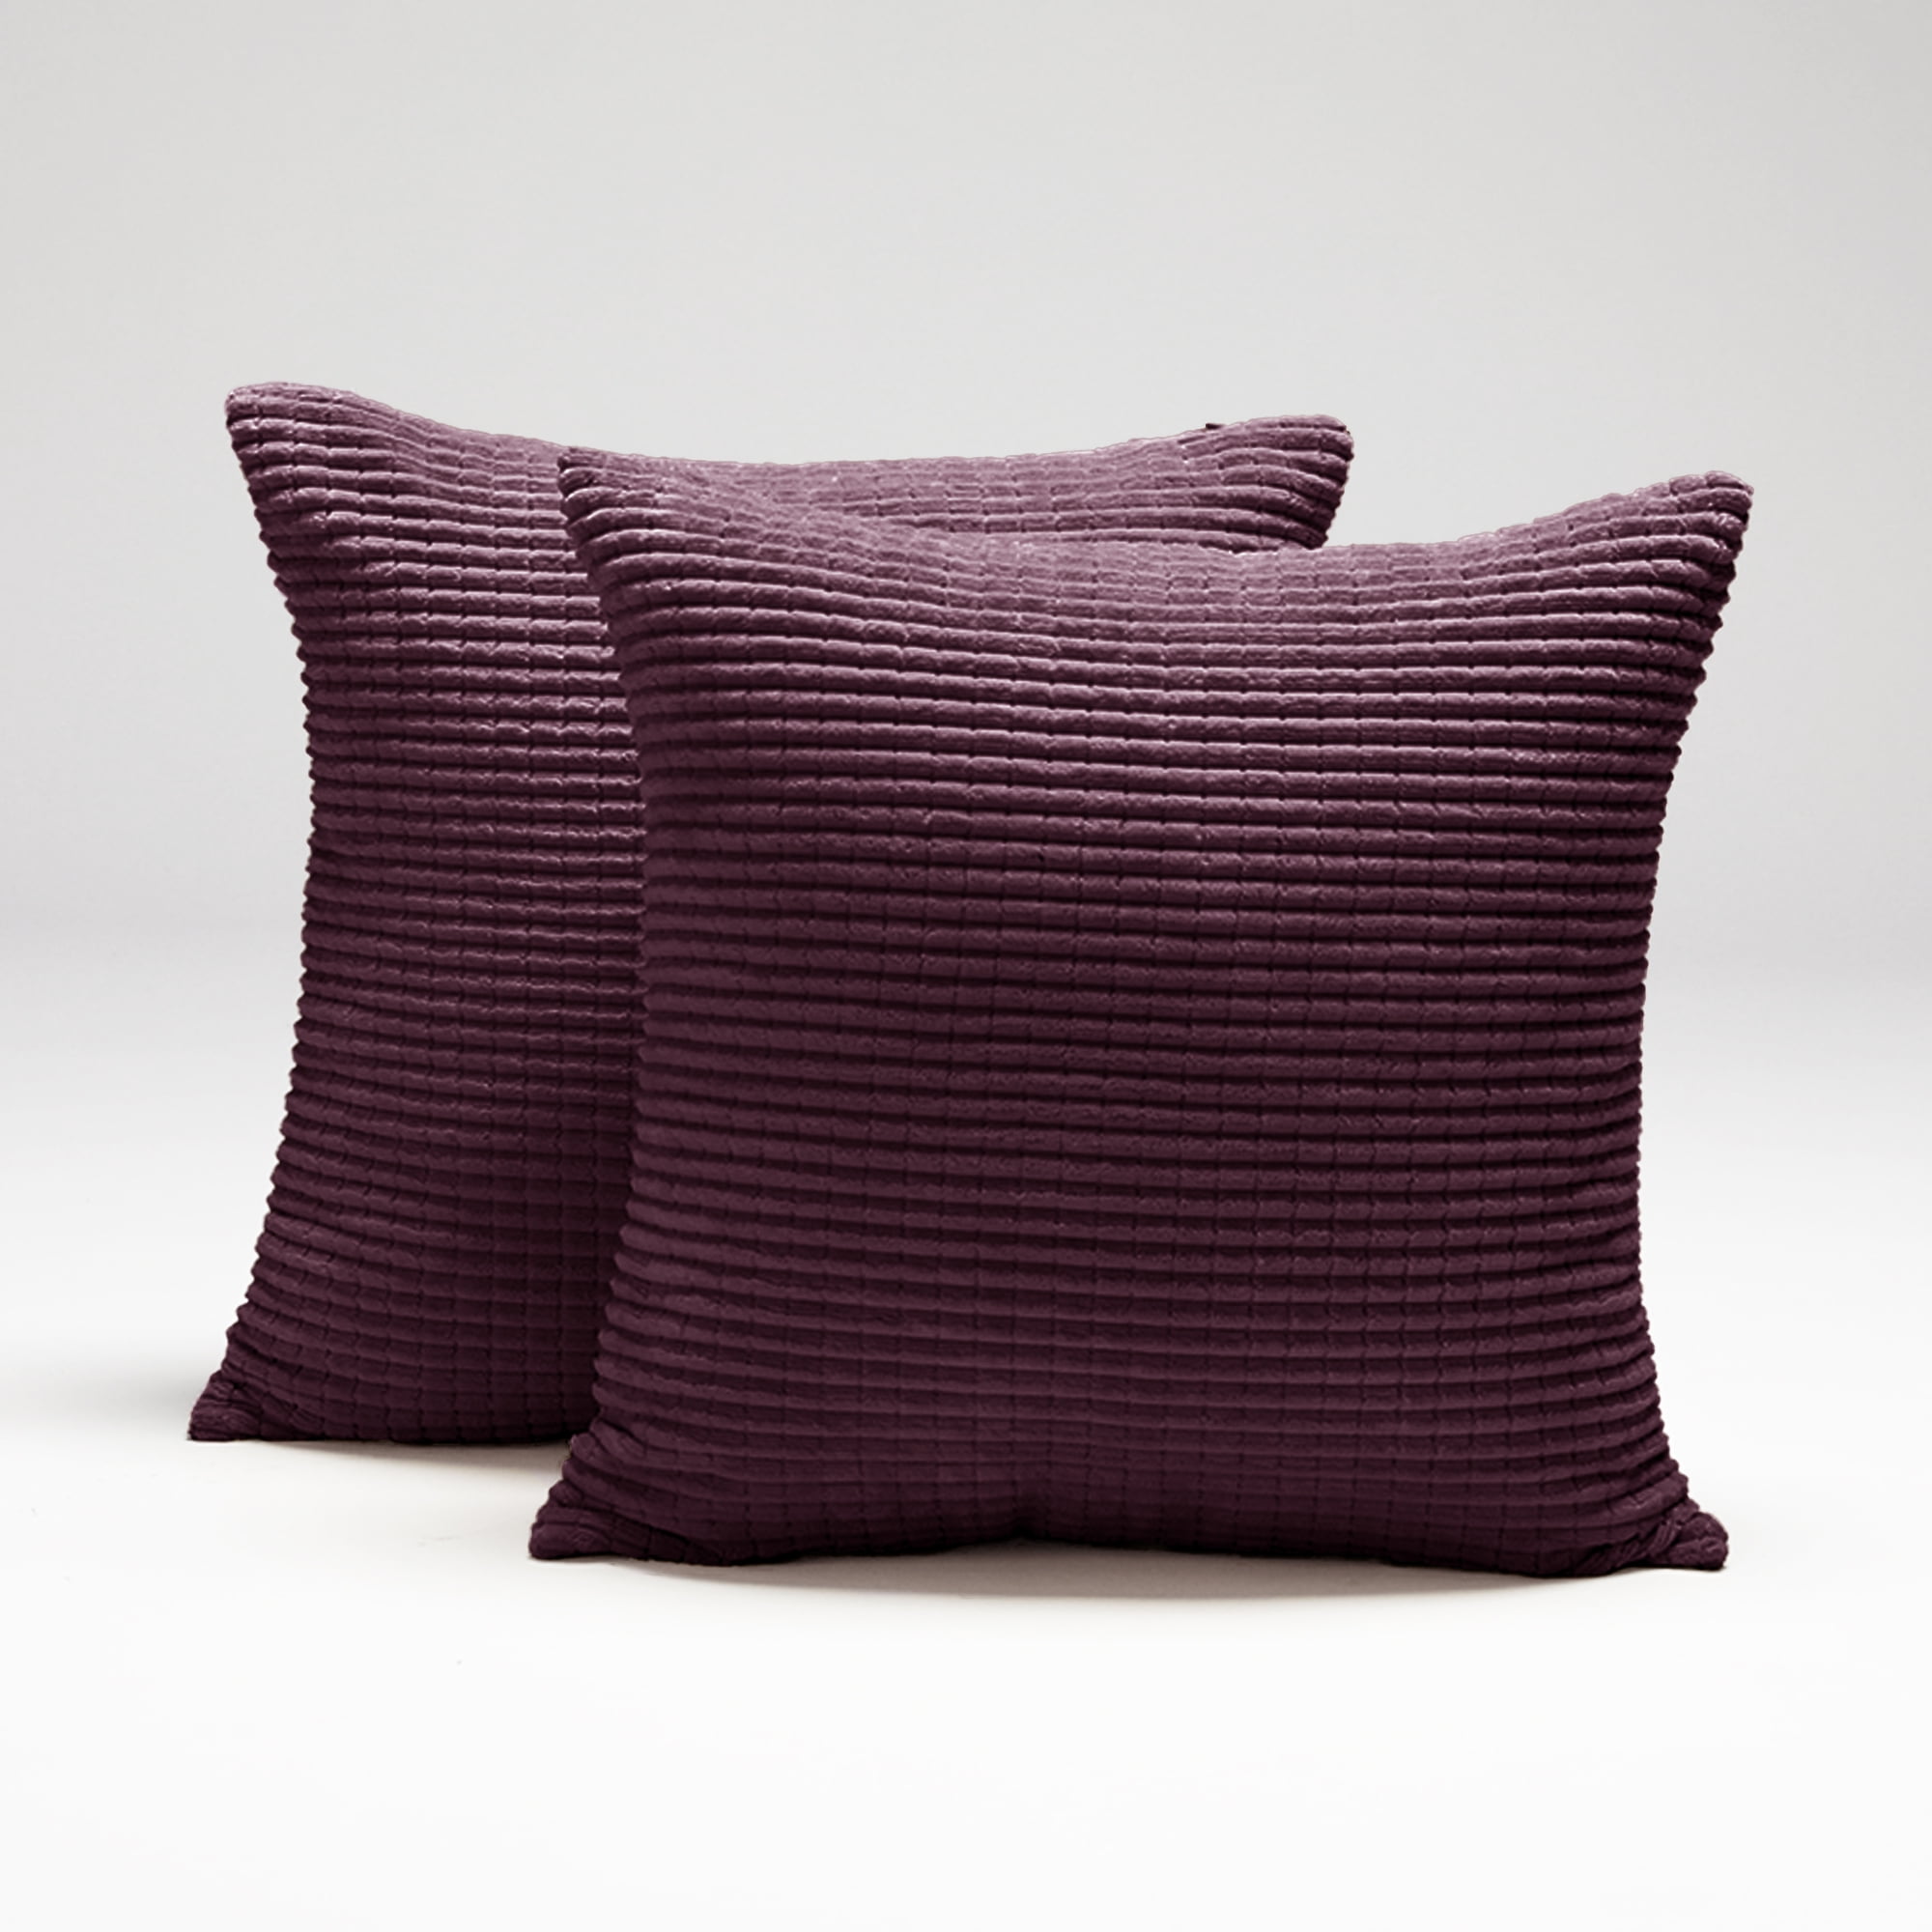 MIULEE Violet Throw Pillow Covers Corduroy Soft Soild Decorative Square  Cushion Covers 2 Pack